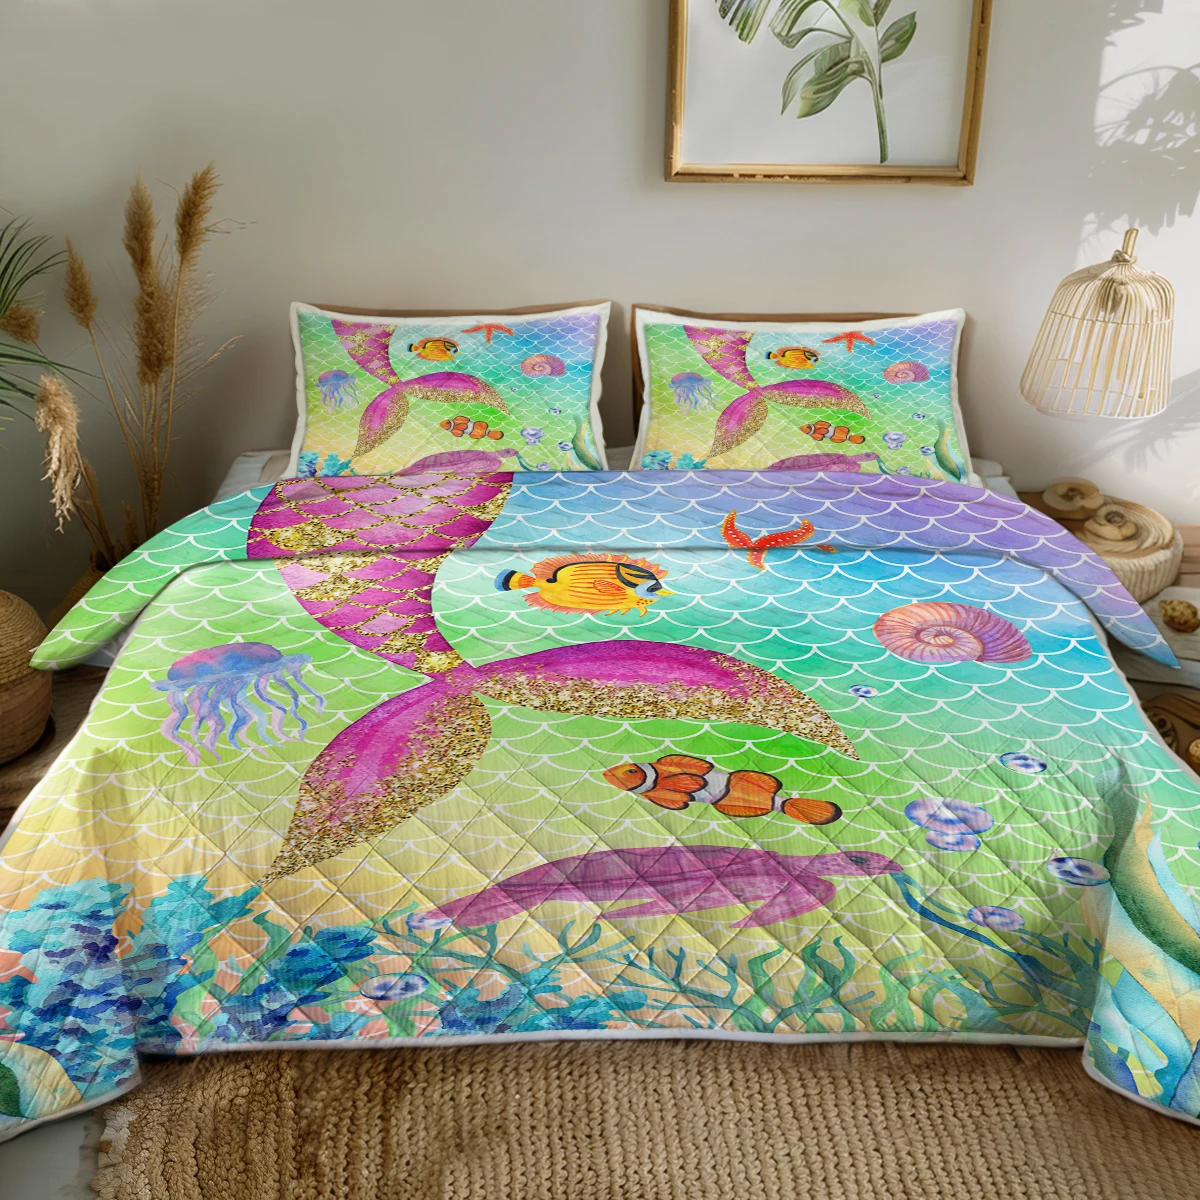 

3PCS Pink Mermaid Tail with Marine Life Design Quilt Set Comforter Set With 2 Pillowcases for Kids and Adults Home Decor